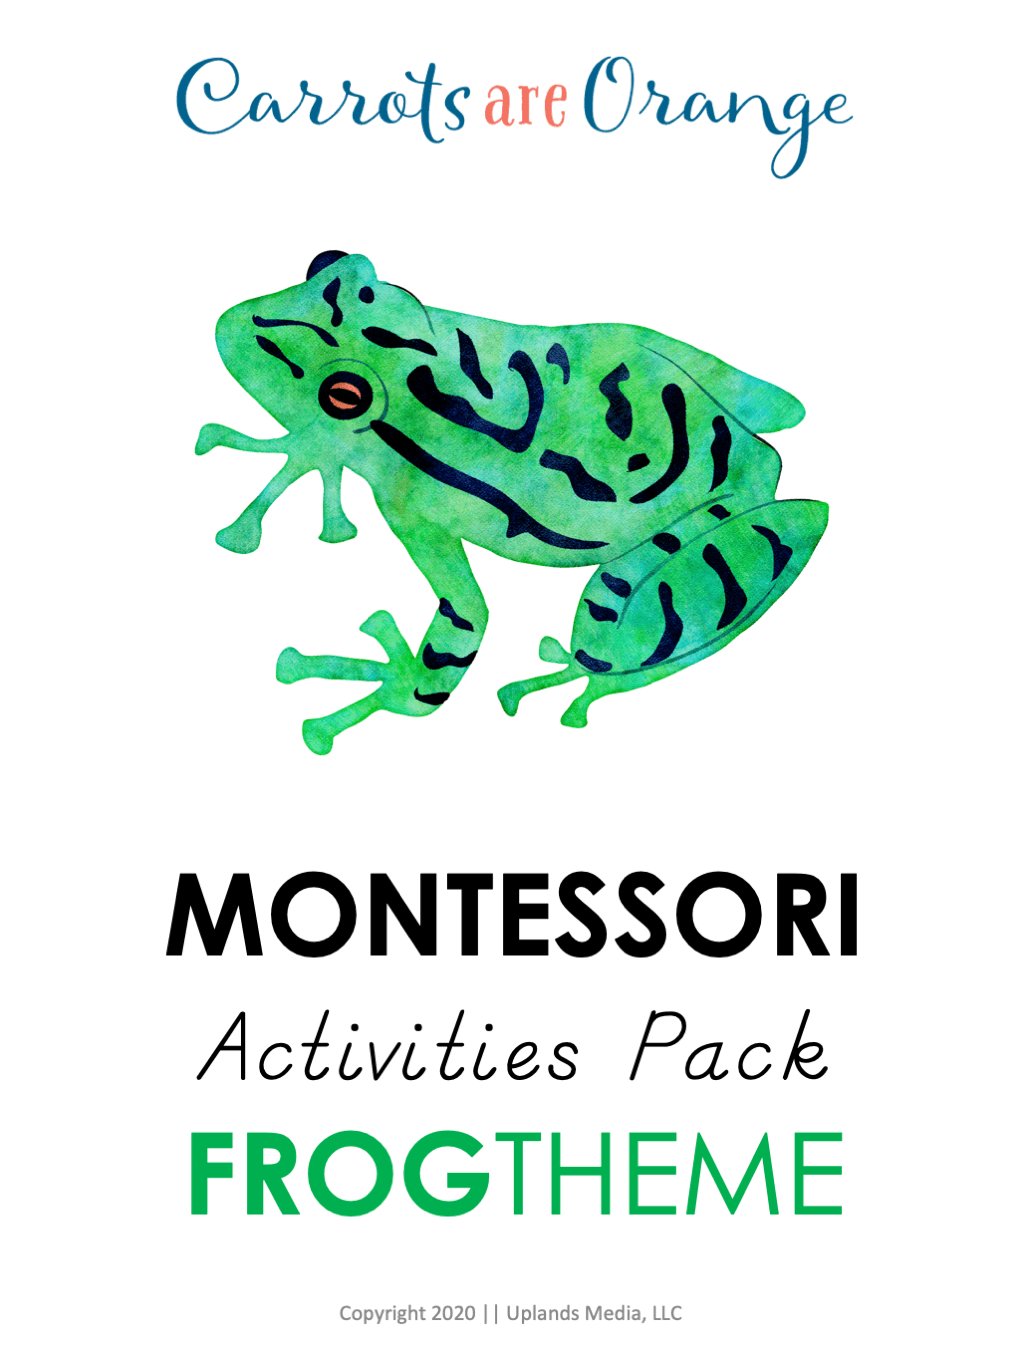 [Activities Pack] Frog Themed - Printables by Carrots Are Orange